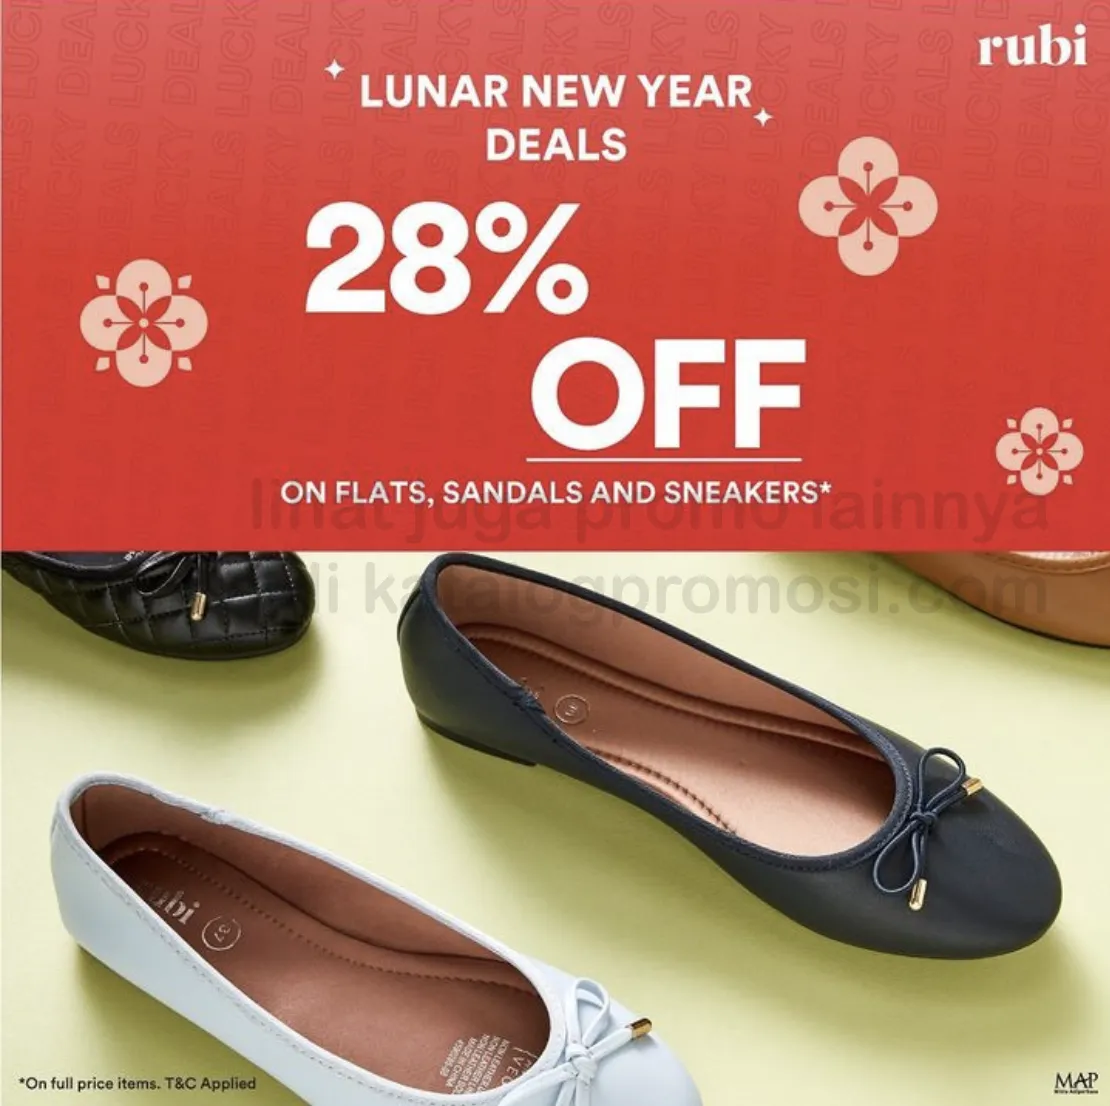 Promo RUBI Lunar New Year Deals - DISCOUNT 28% off on Flats / Sandals / Sneakers